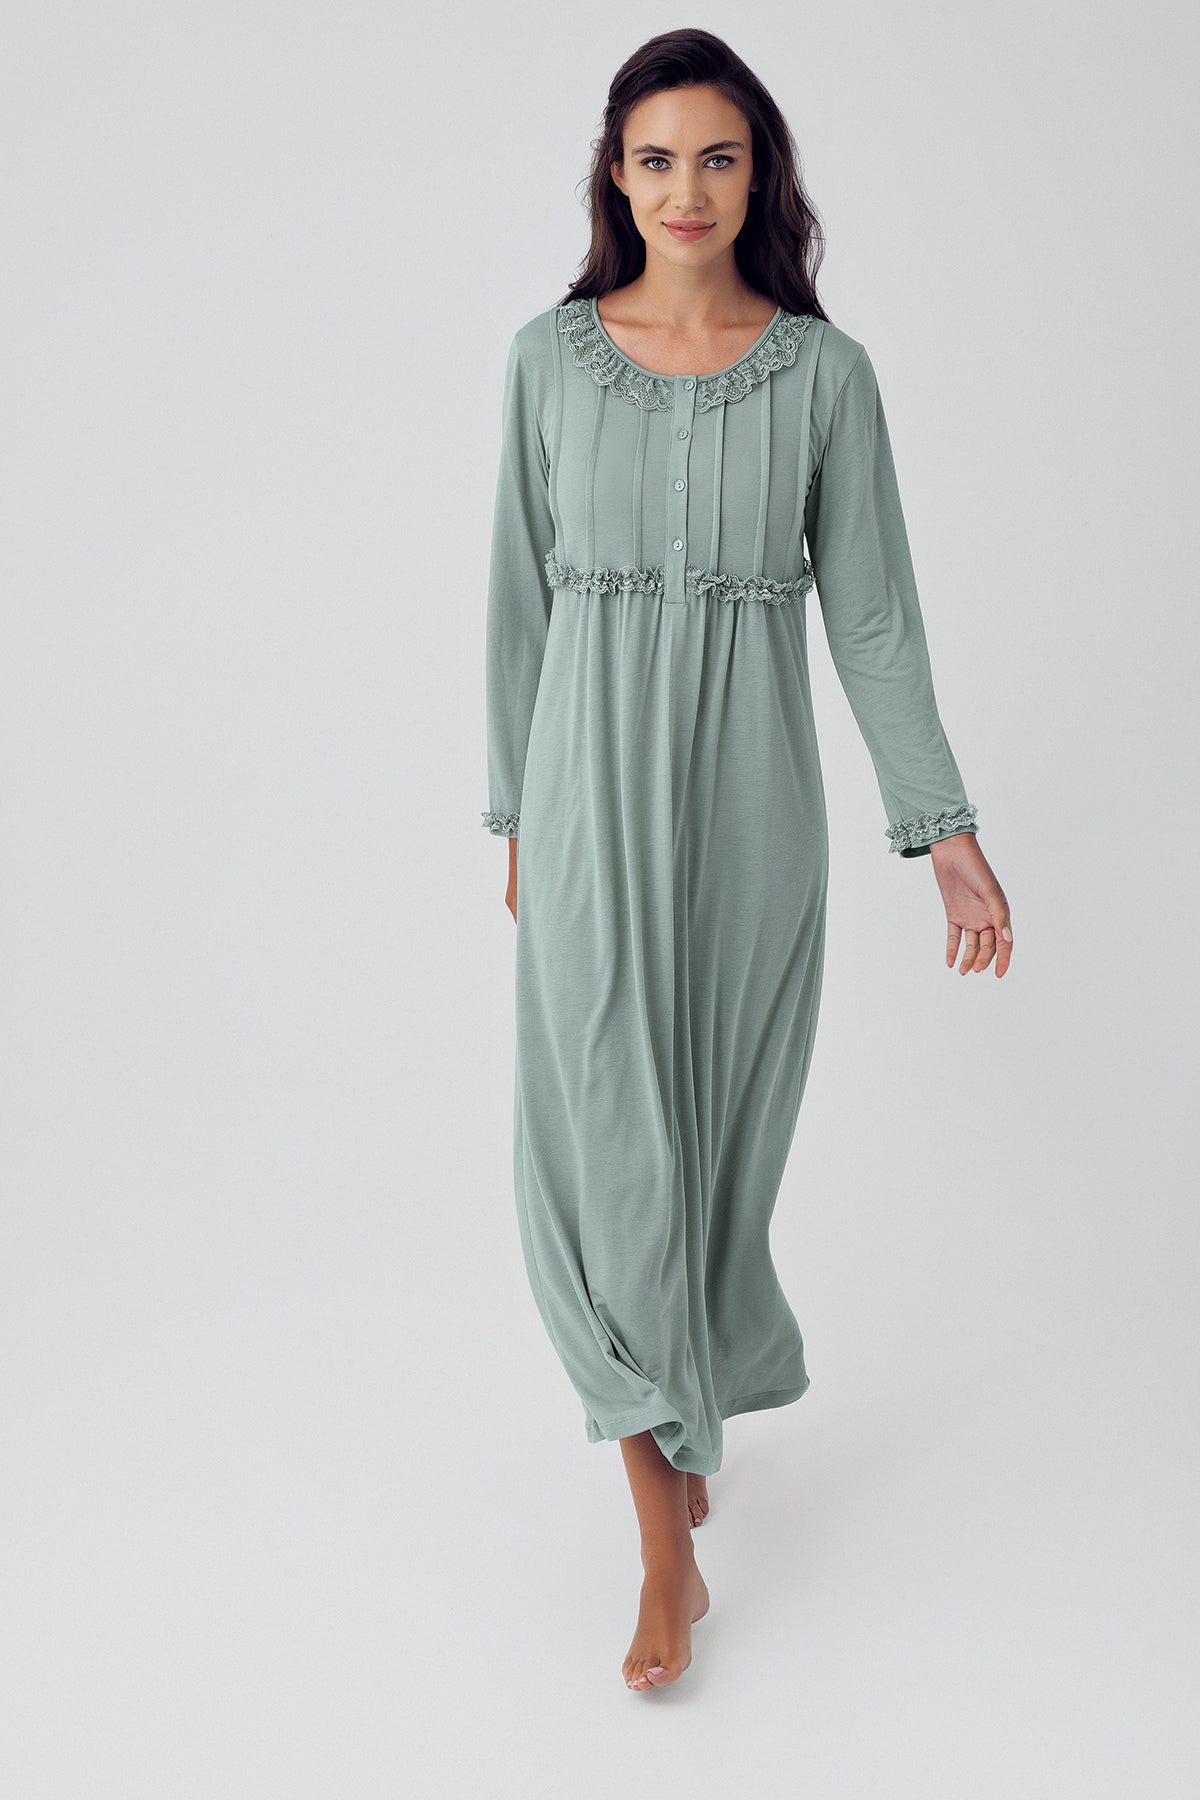 Shopymommy 15121 Guipure Collar Plus Size Maternity & Nursing Nightgown Green